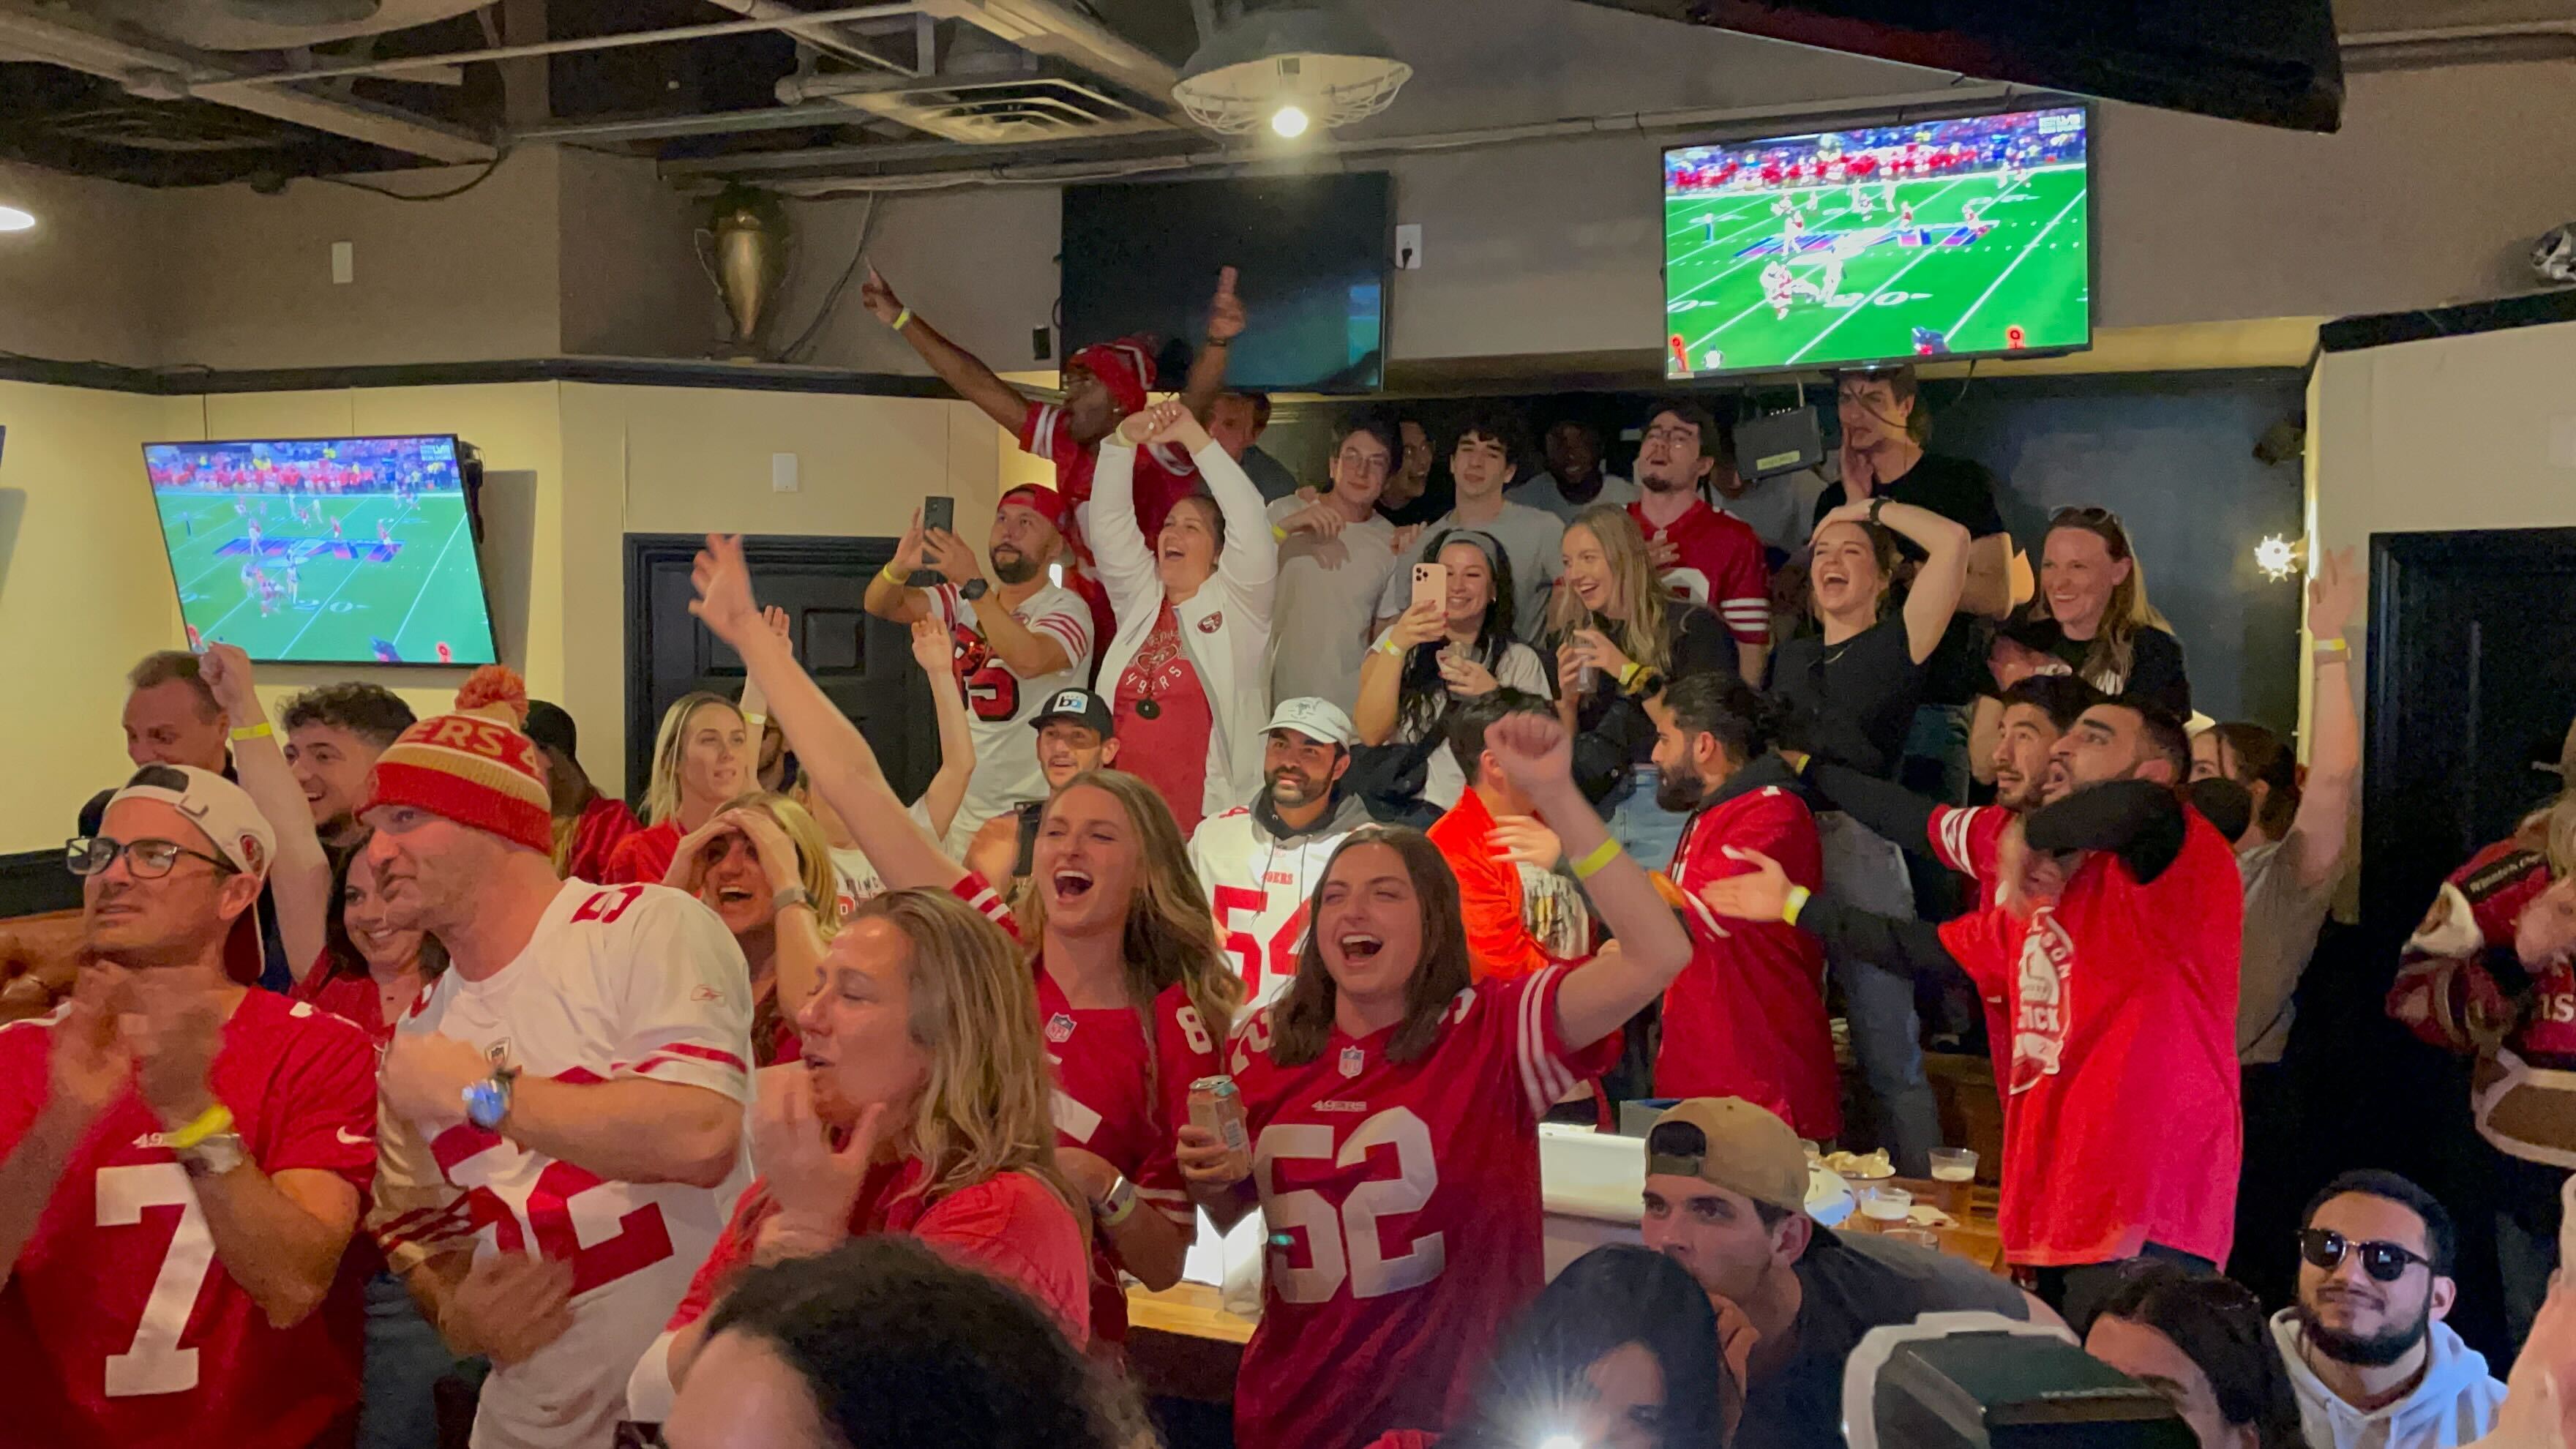 A lively crowd in sports jerseys cheering in a bar with TVs showing a football game.